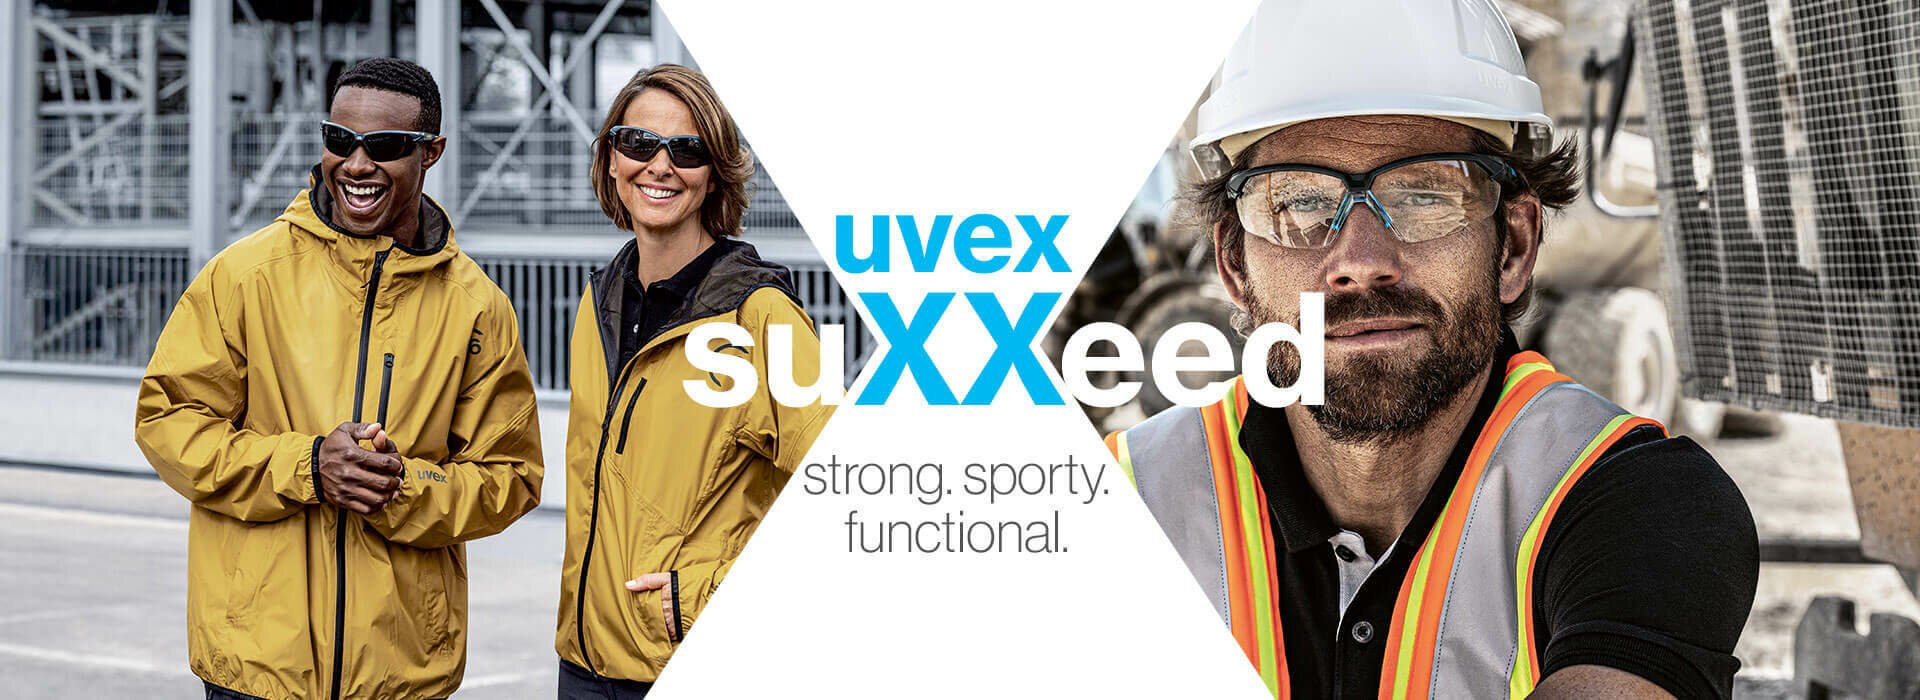 sporty safety glasses uvex suXXeed